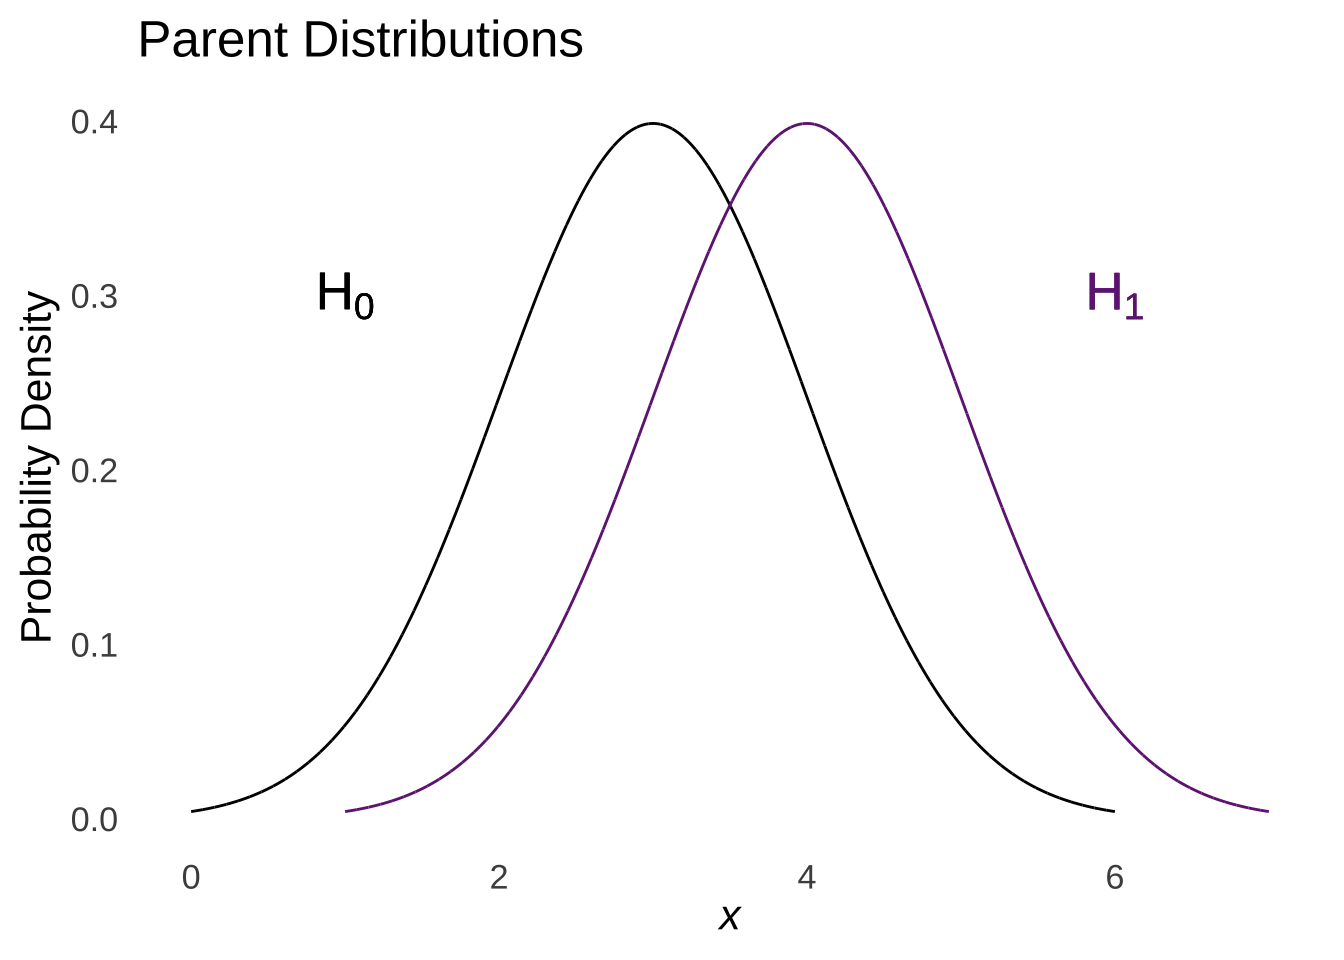 Null and Alternative Distributions of $N$ (top) and $t$ (bottom)